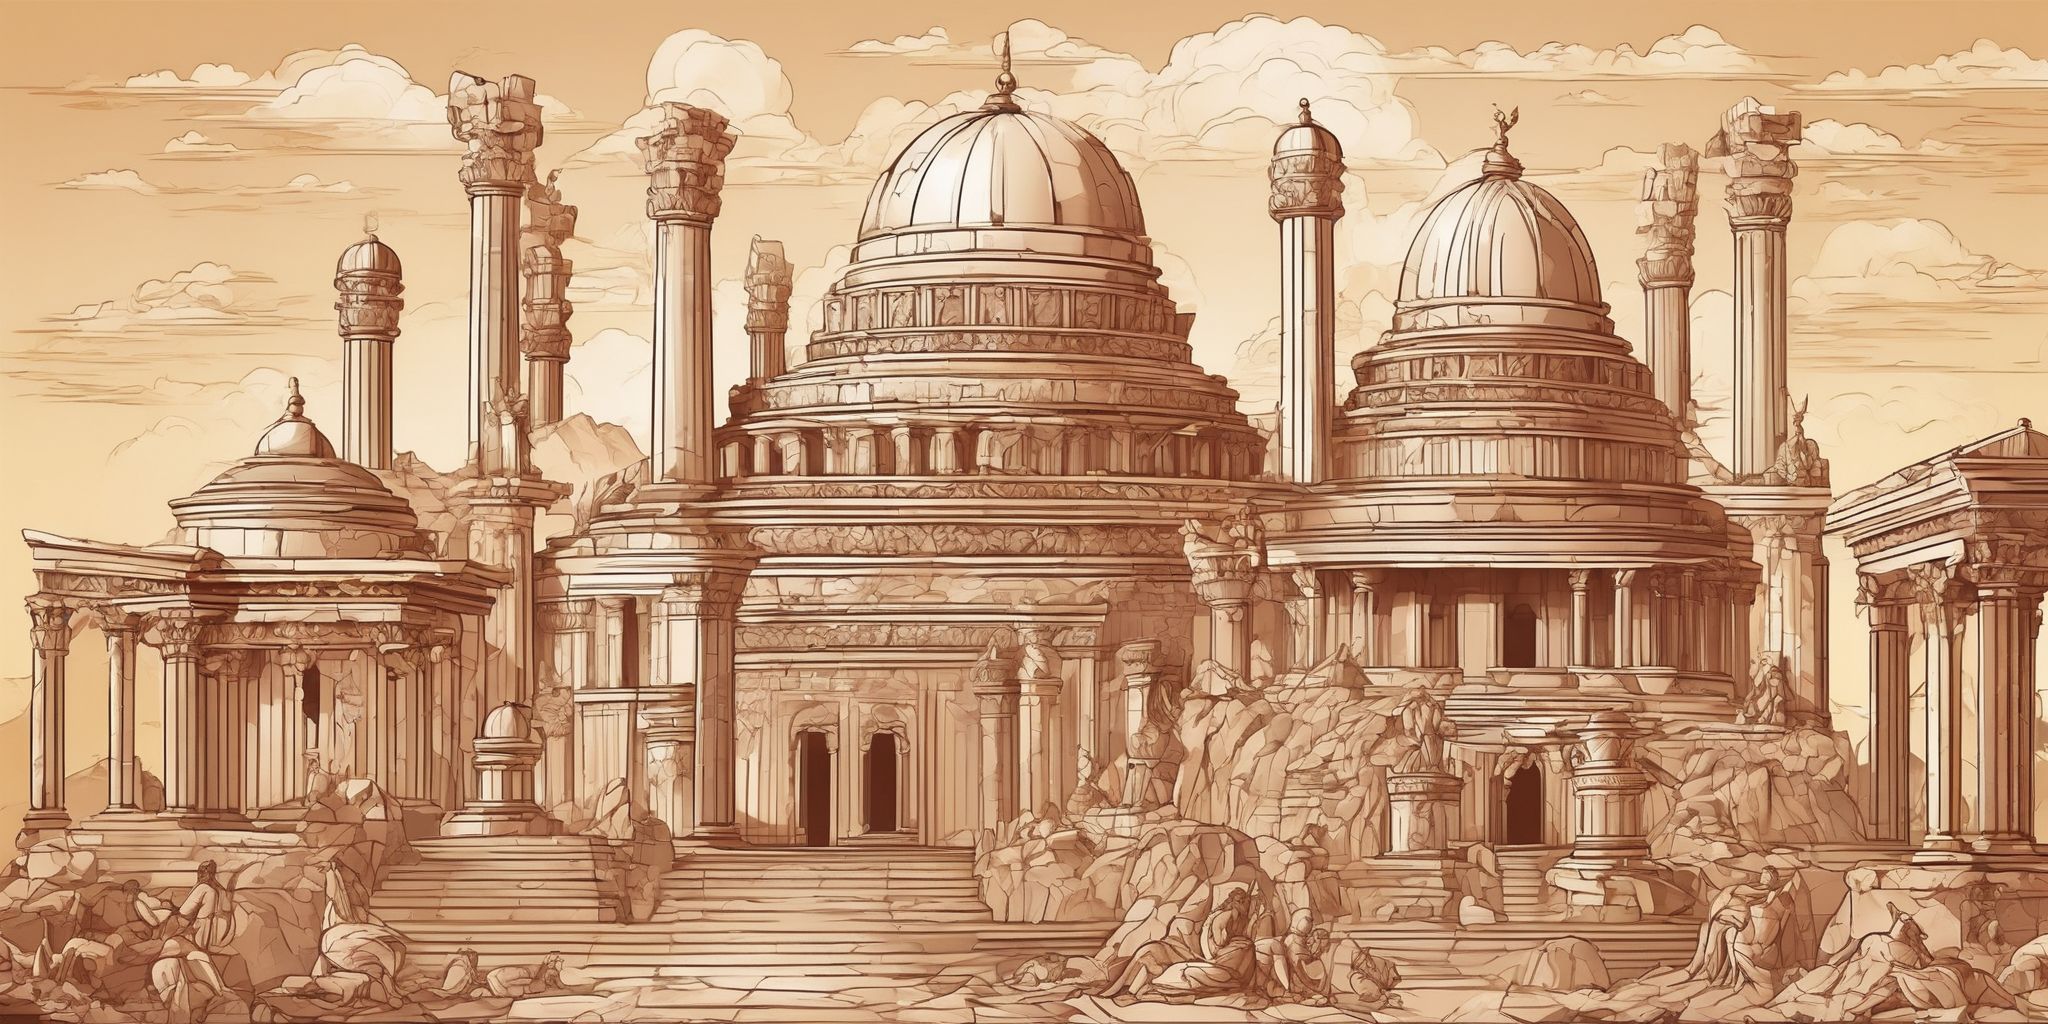 Ancient empire in illustration style with gradients and white background